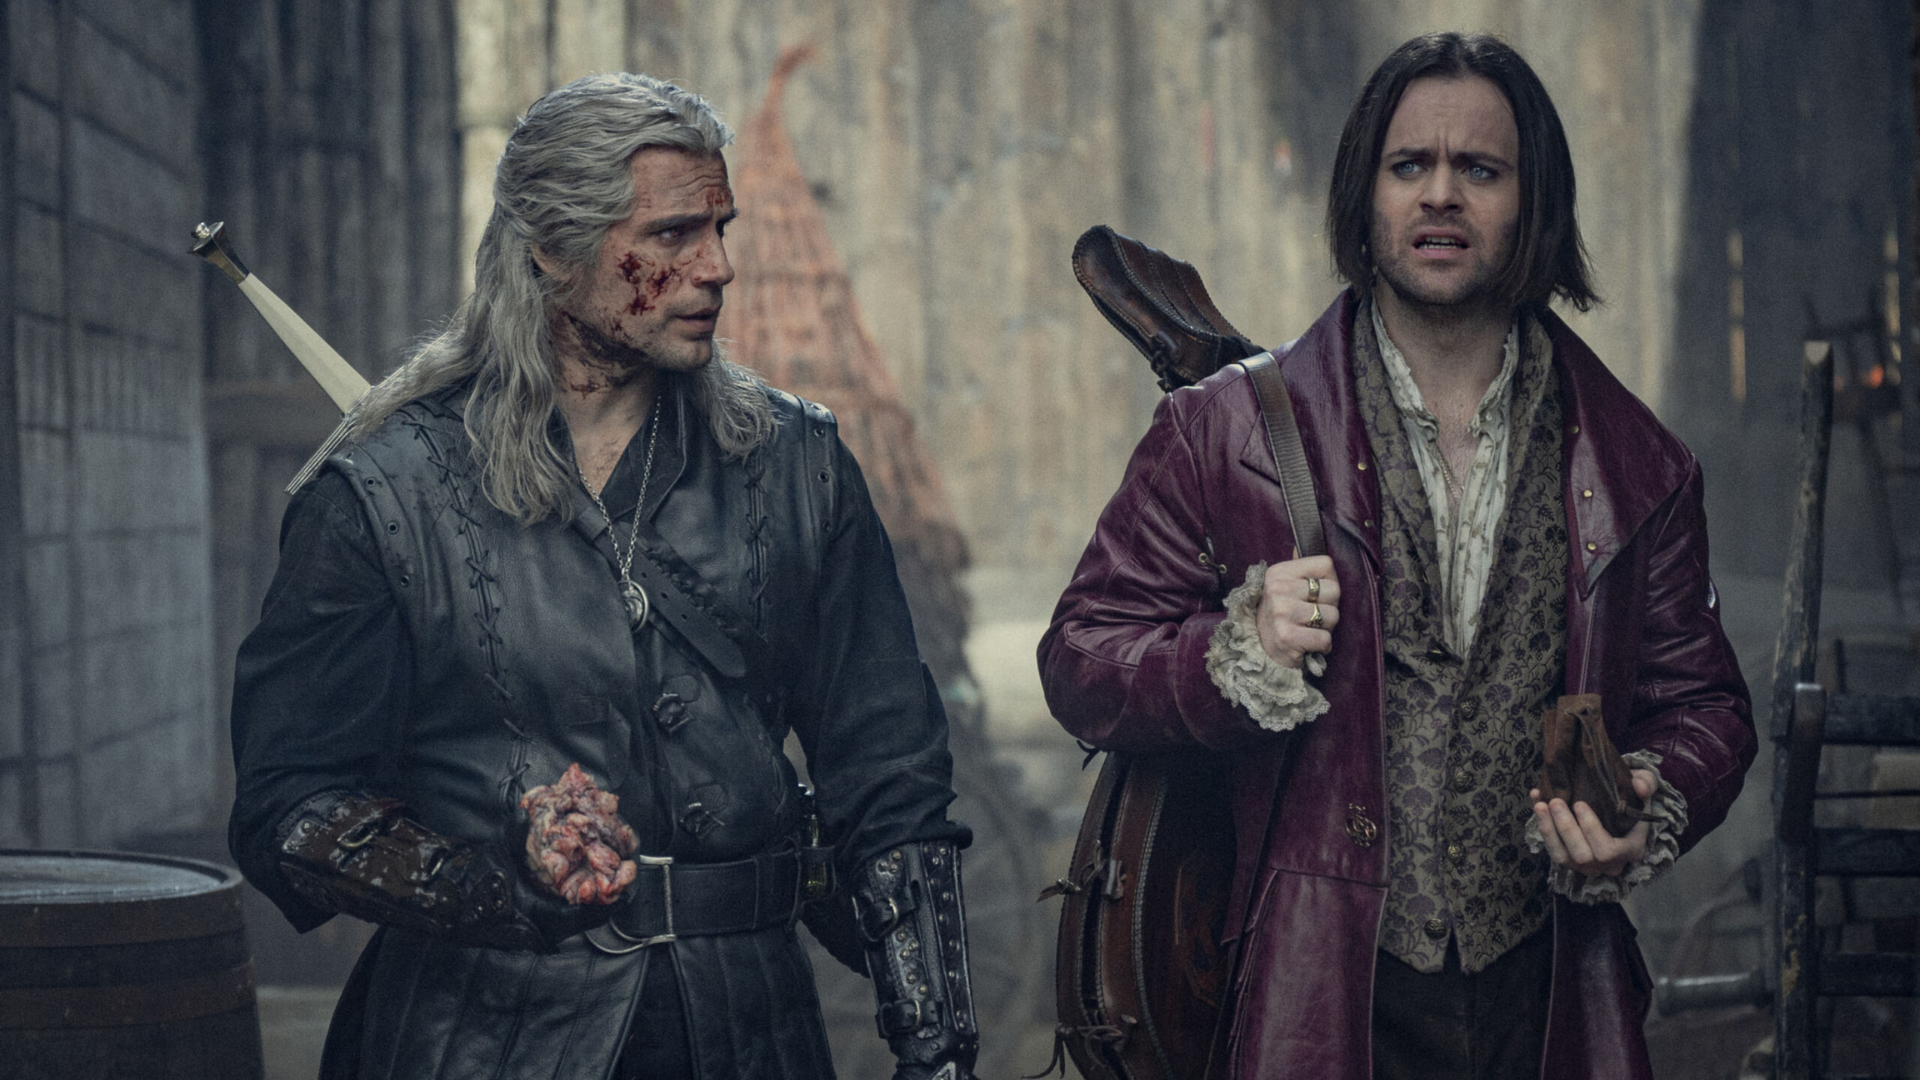 Henry Cavill as Geralt and Joey Batey as Jaskier in Netflix's The Witcher